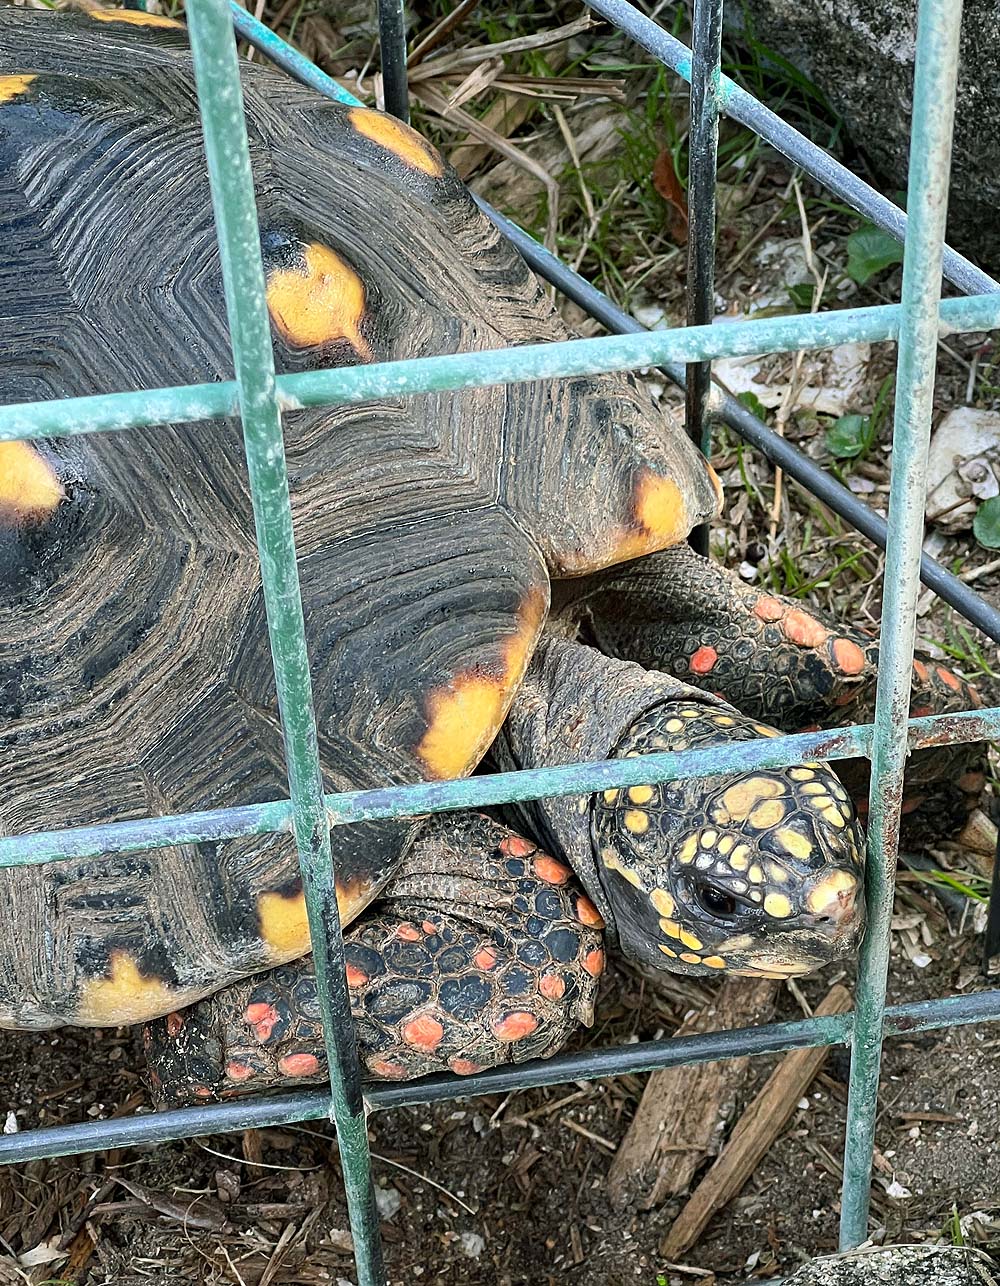 Red-footed tortoises